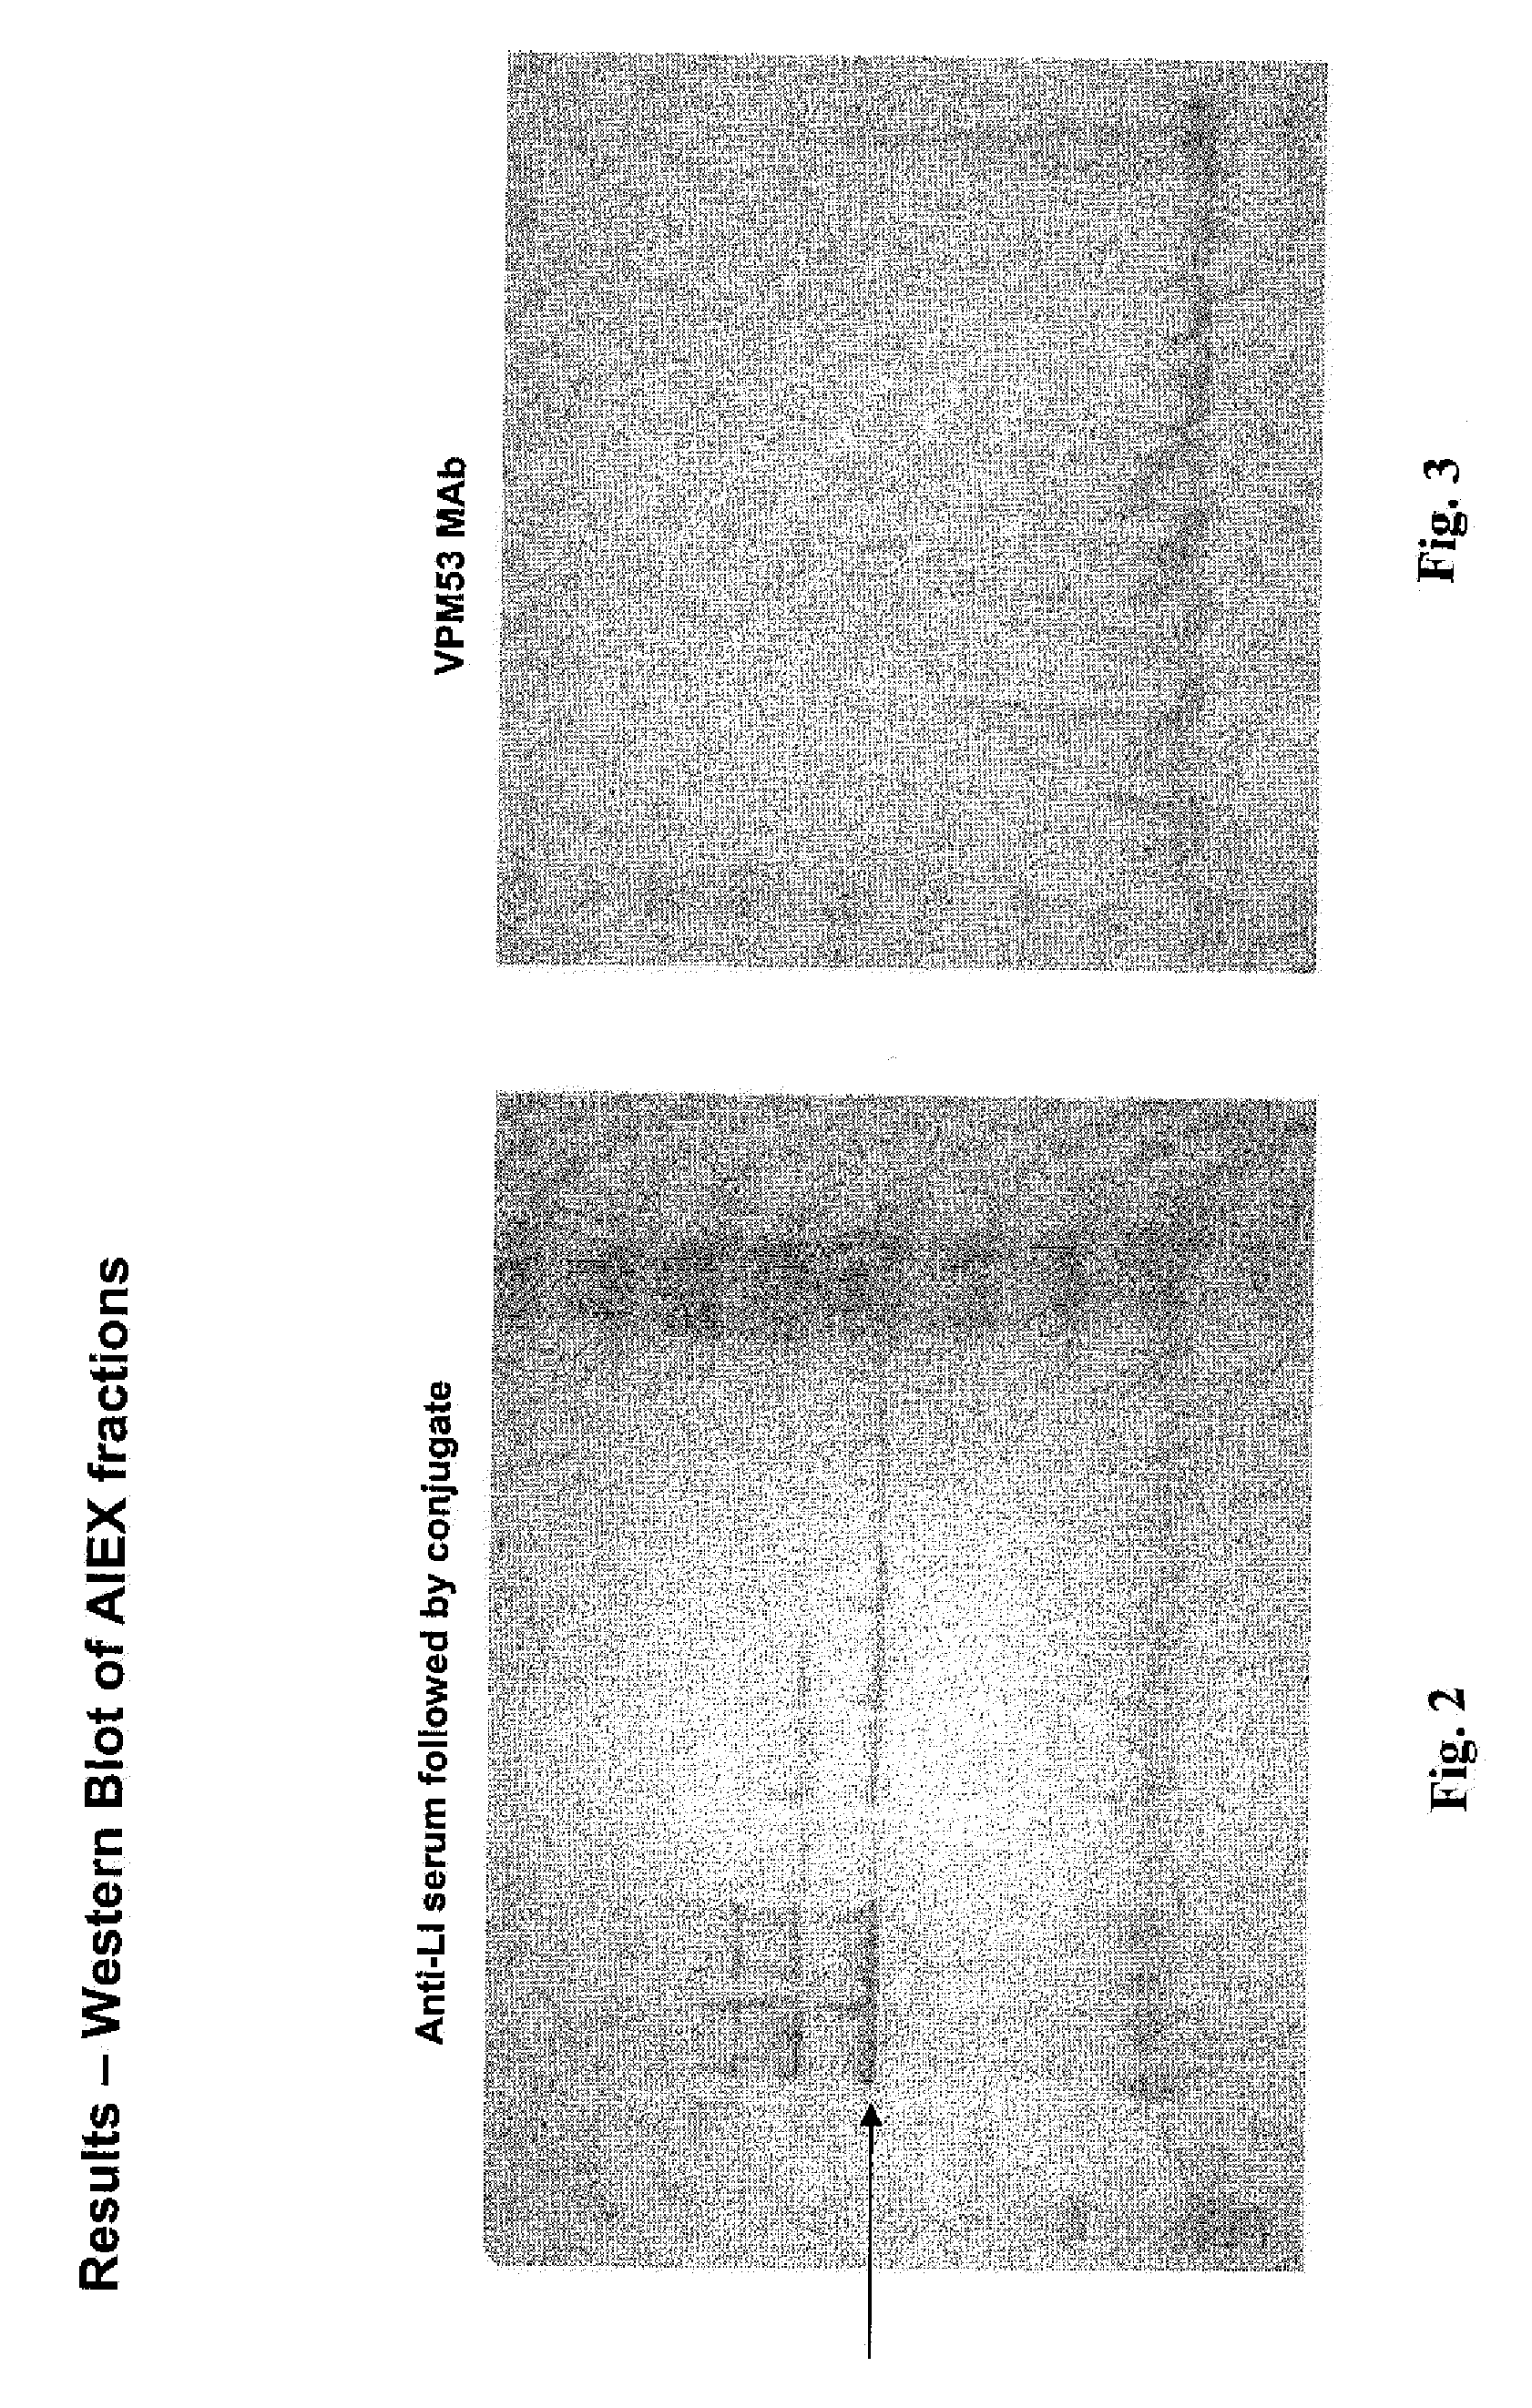 Lawsonia protein useful as a component in subunit vaccine and methods of making and using thereof